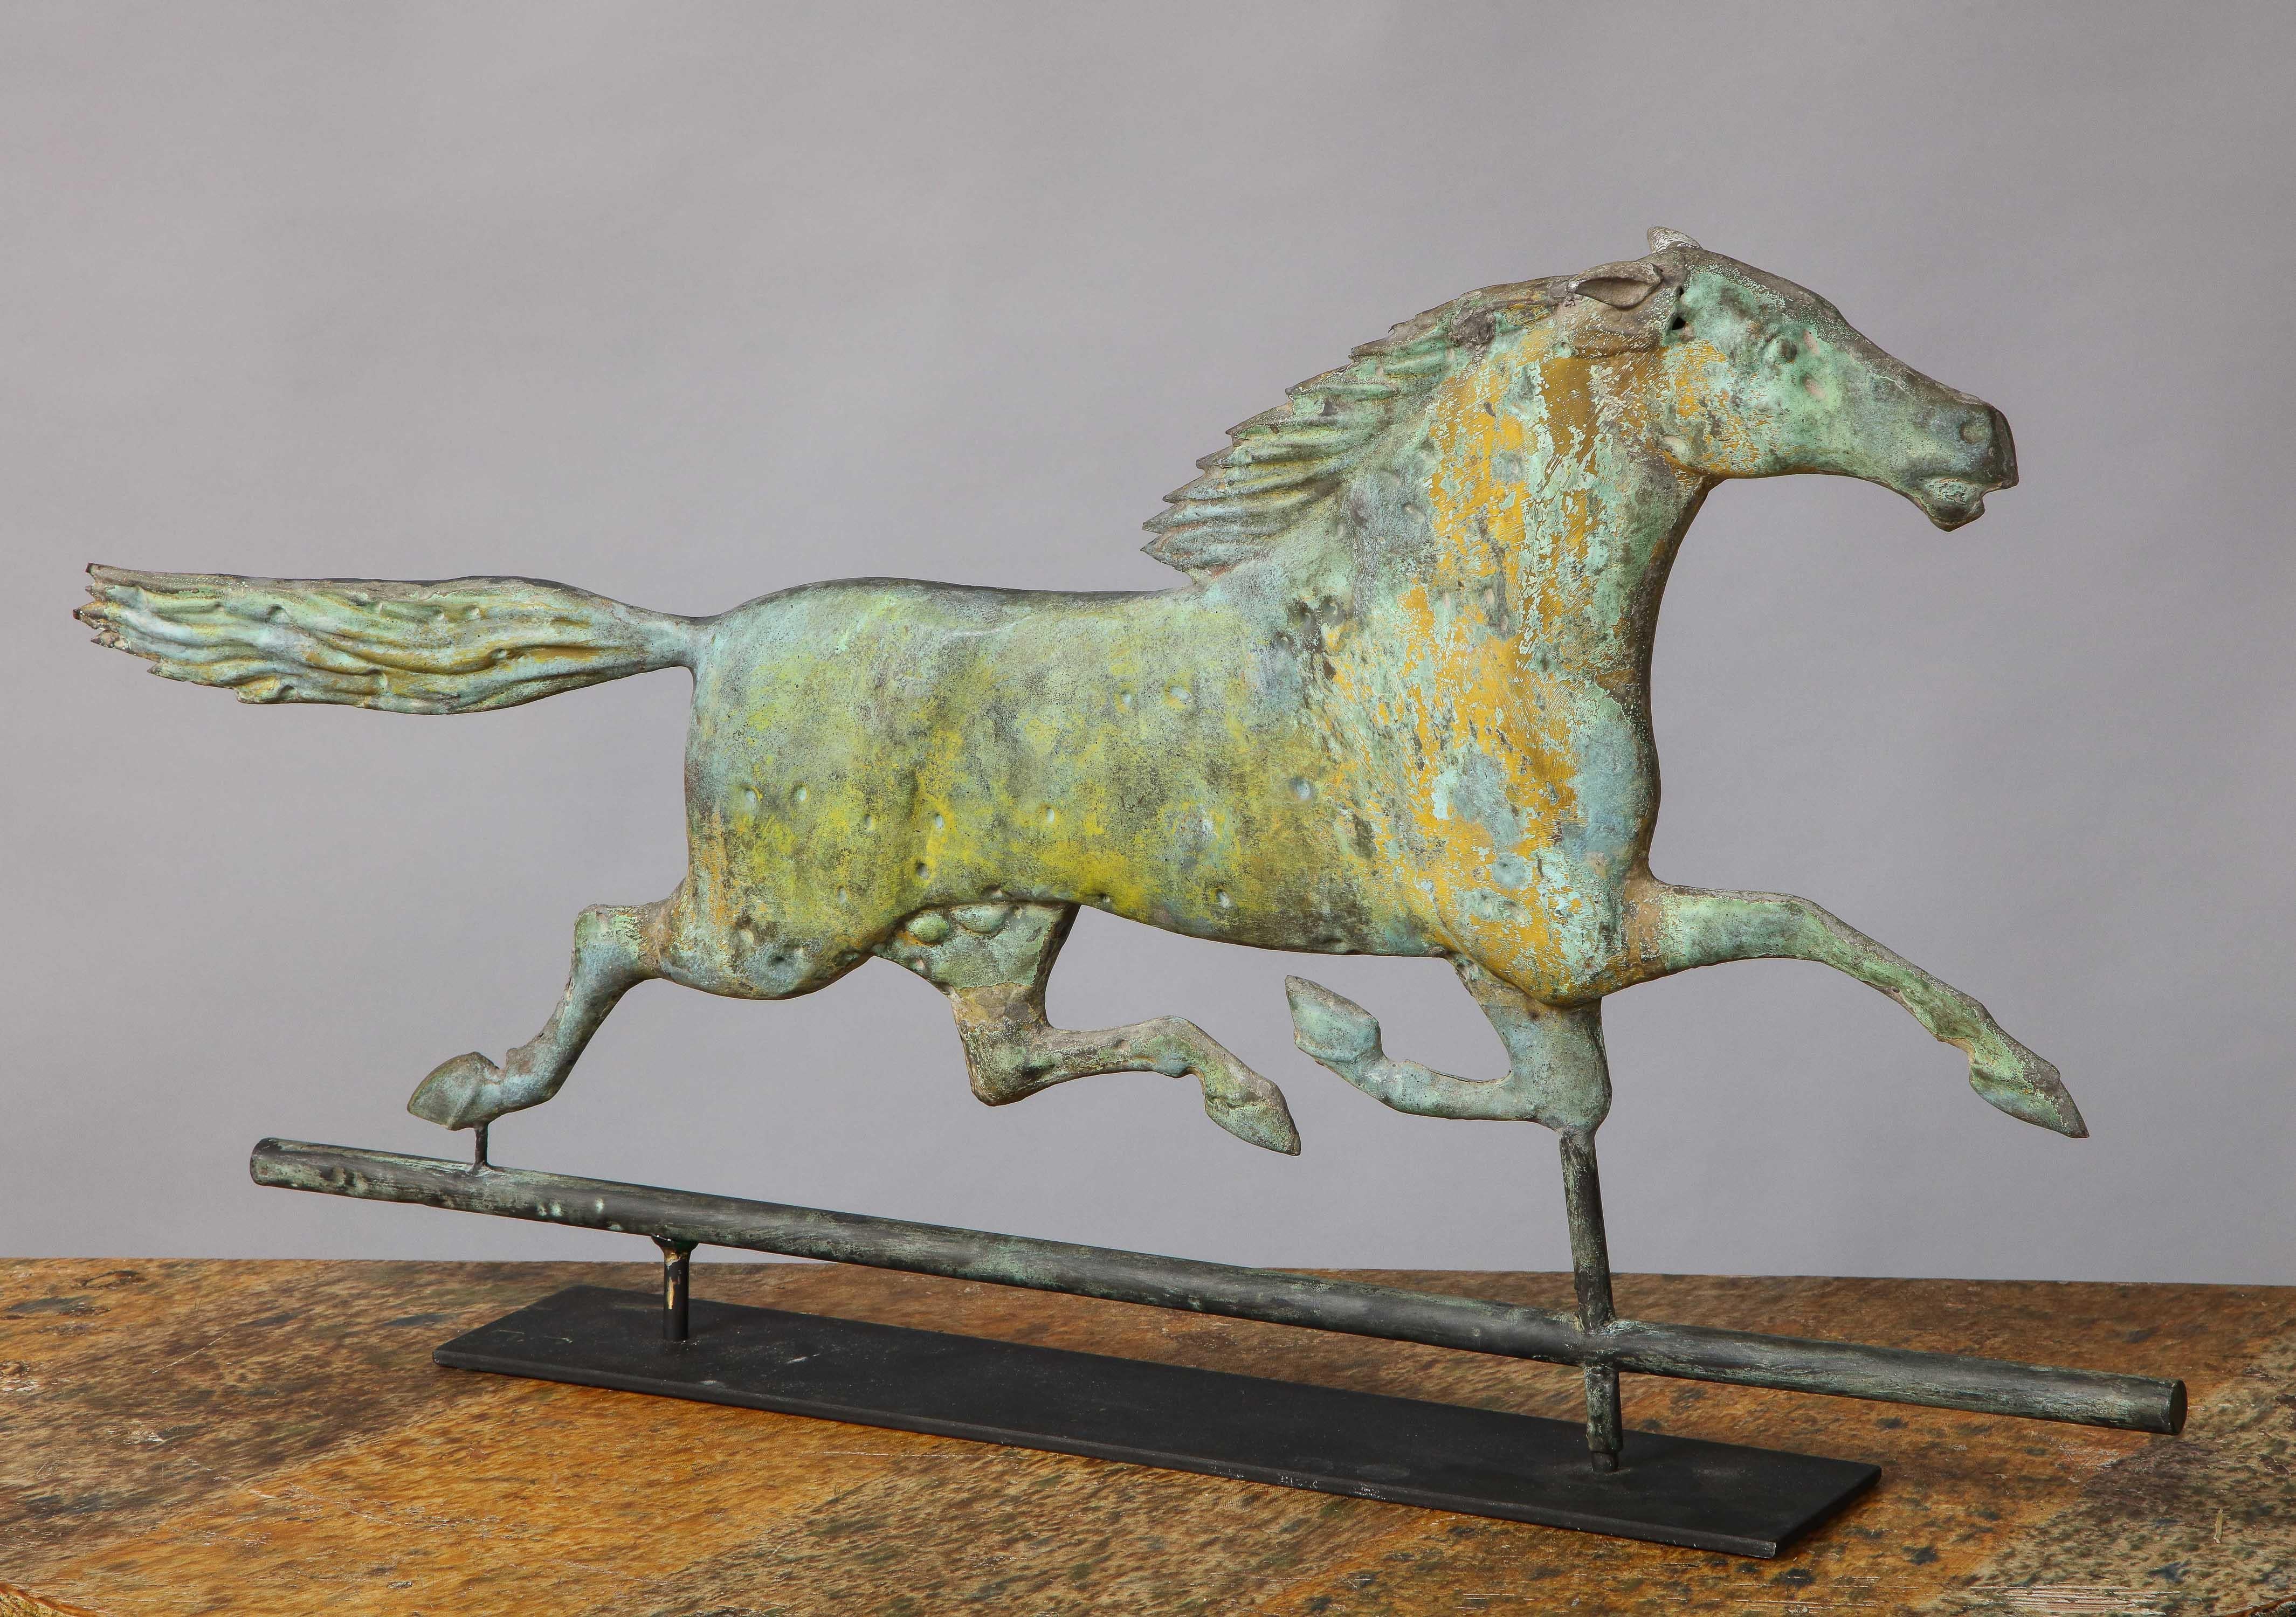 Fine American 19th century running horse weathervane, the full bodied copper horse having richly patinated surface with traces of original mustard paint (or yellow gold sizing).